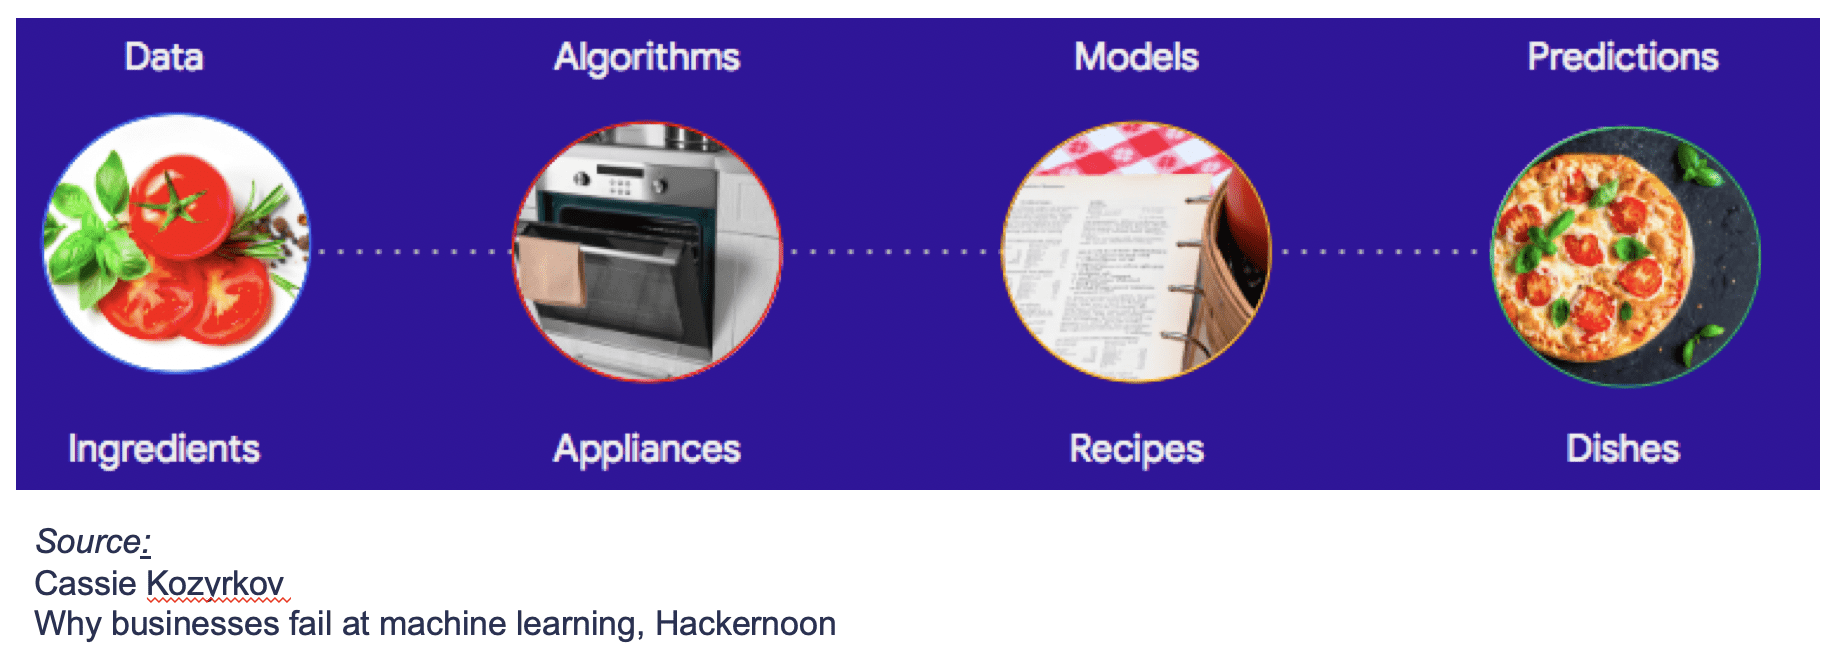 Pizza analogy that describes the four elements required for data science: data/ingredients, algorithms/appliances, models/recipes and predictions/pizzas.